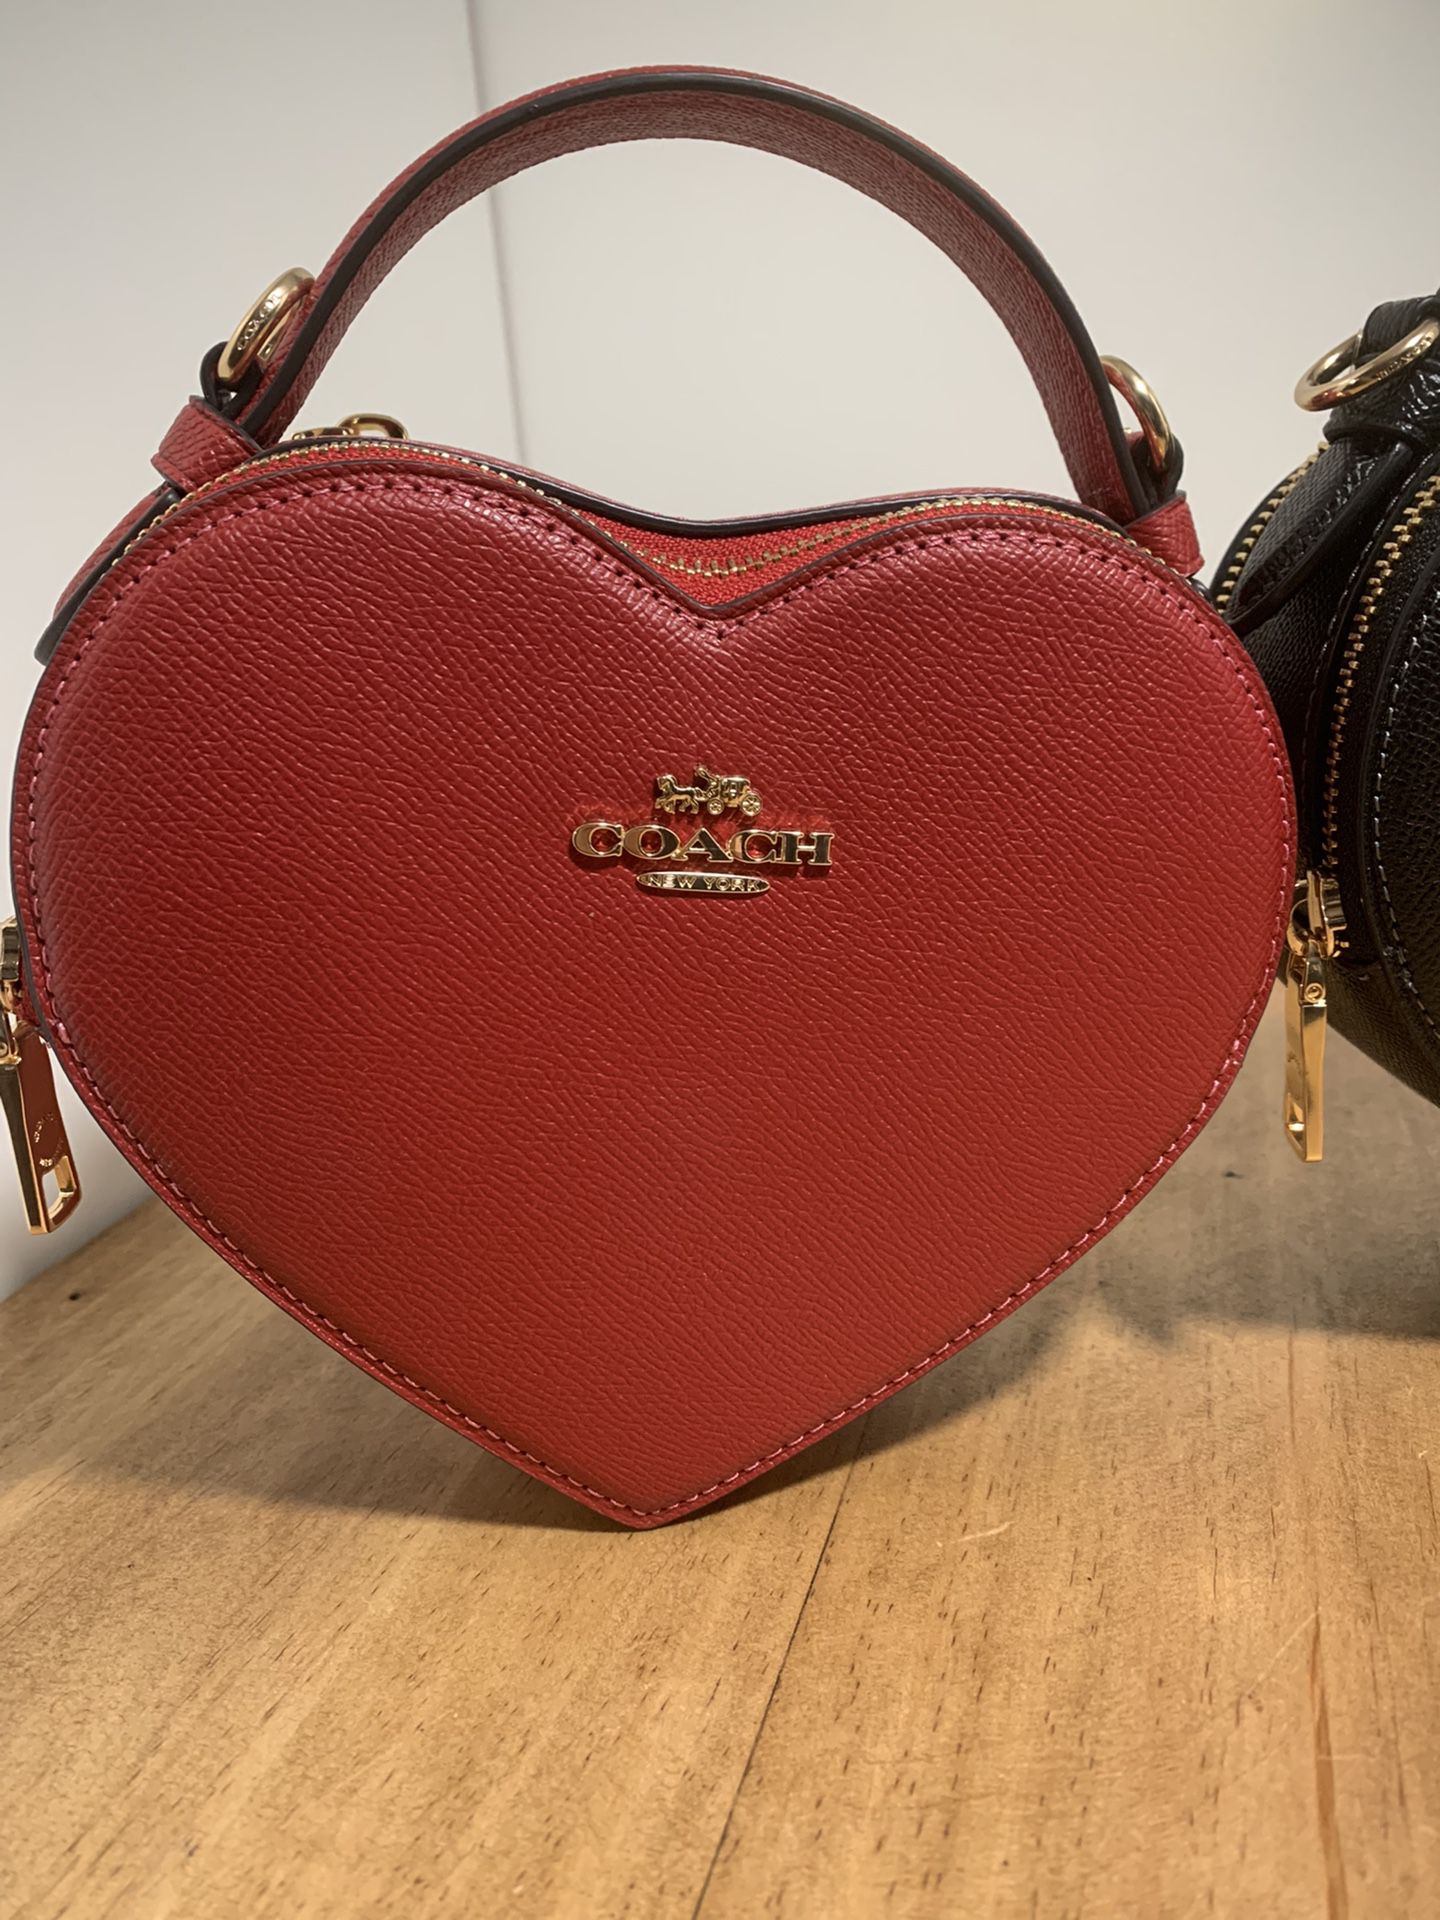 Coach Heart Bag for Sale in Chino, CA - OfferUp